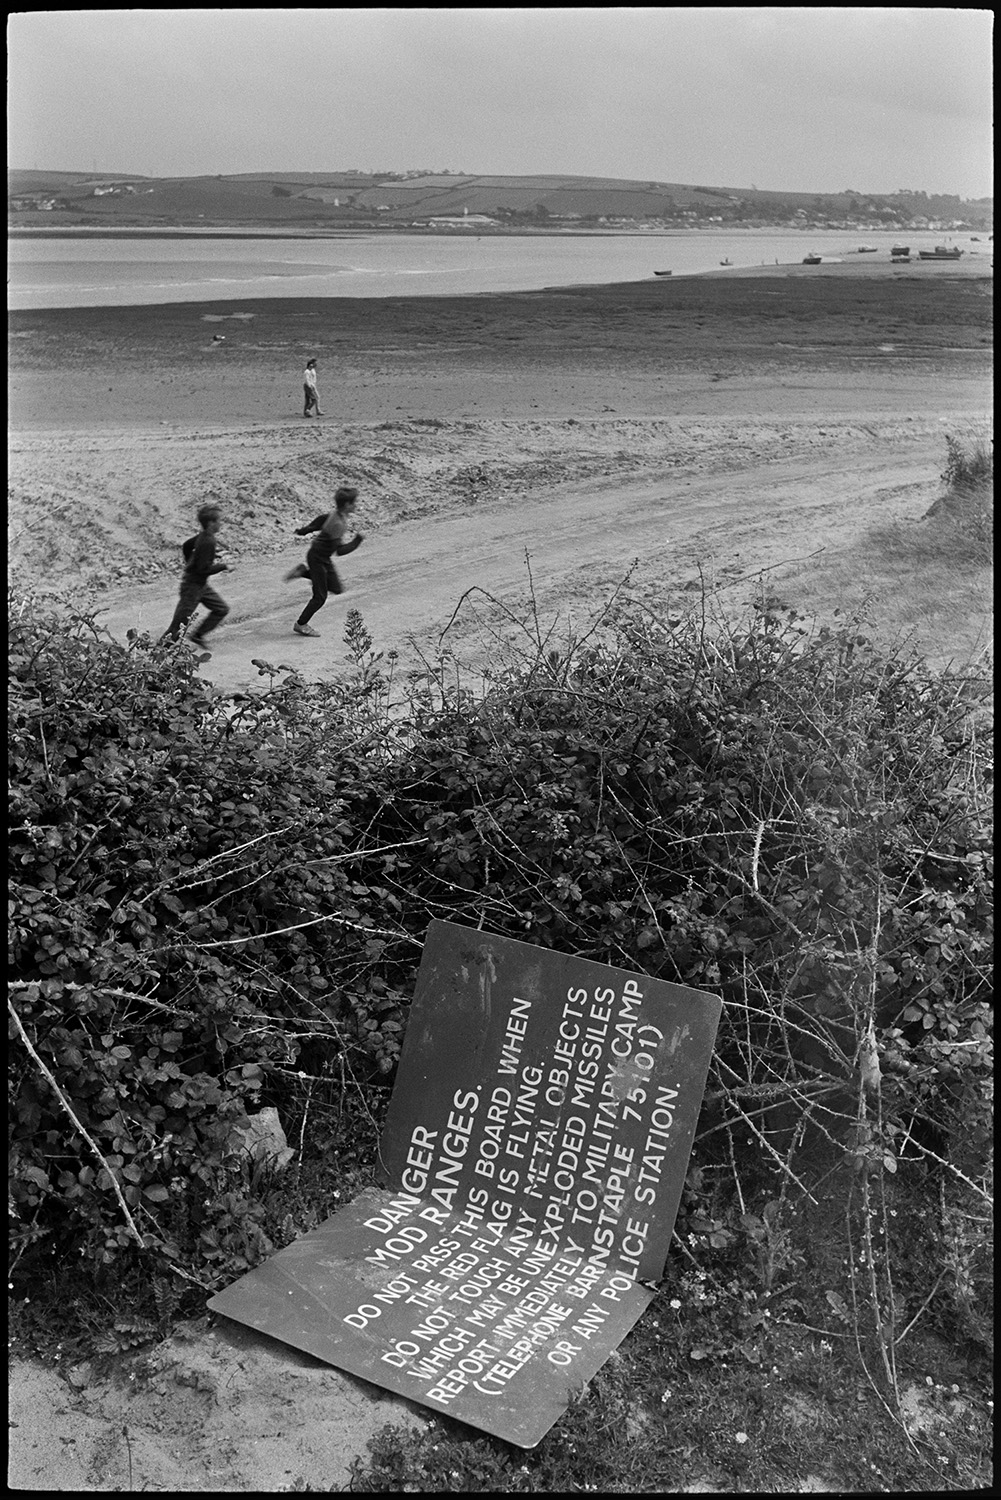 View across estuary with beach and distant power station. 
[Children playing on the beach at Braunton Burrows. A sign in foliage in the foreground is warning about metal objects and unexploded missiles. The estuary is visible in the background.]